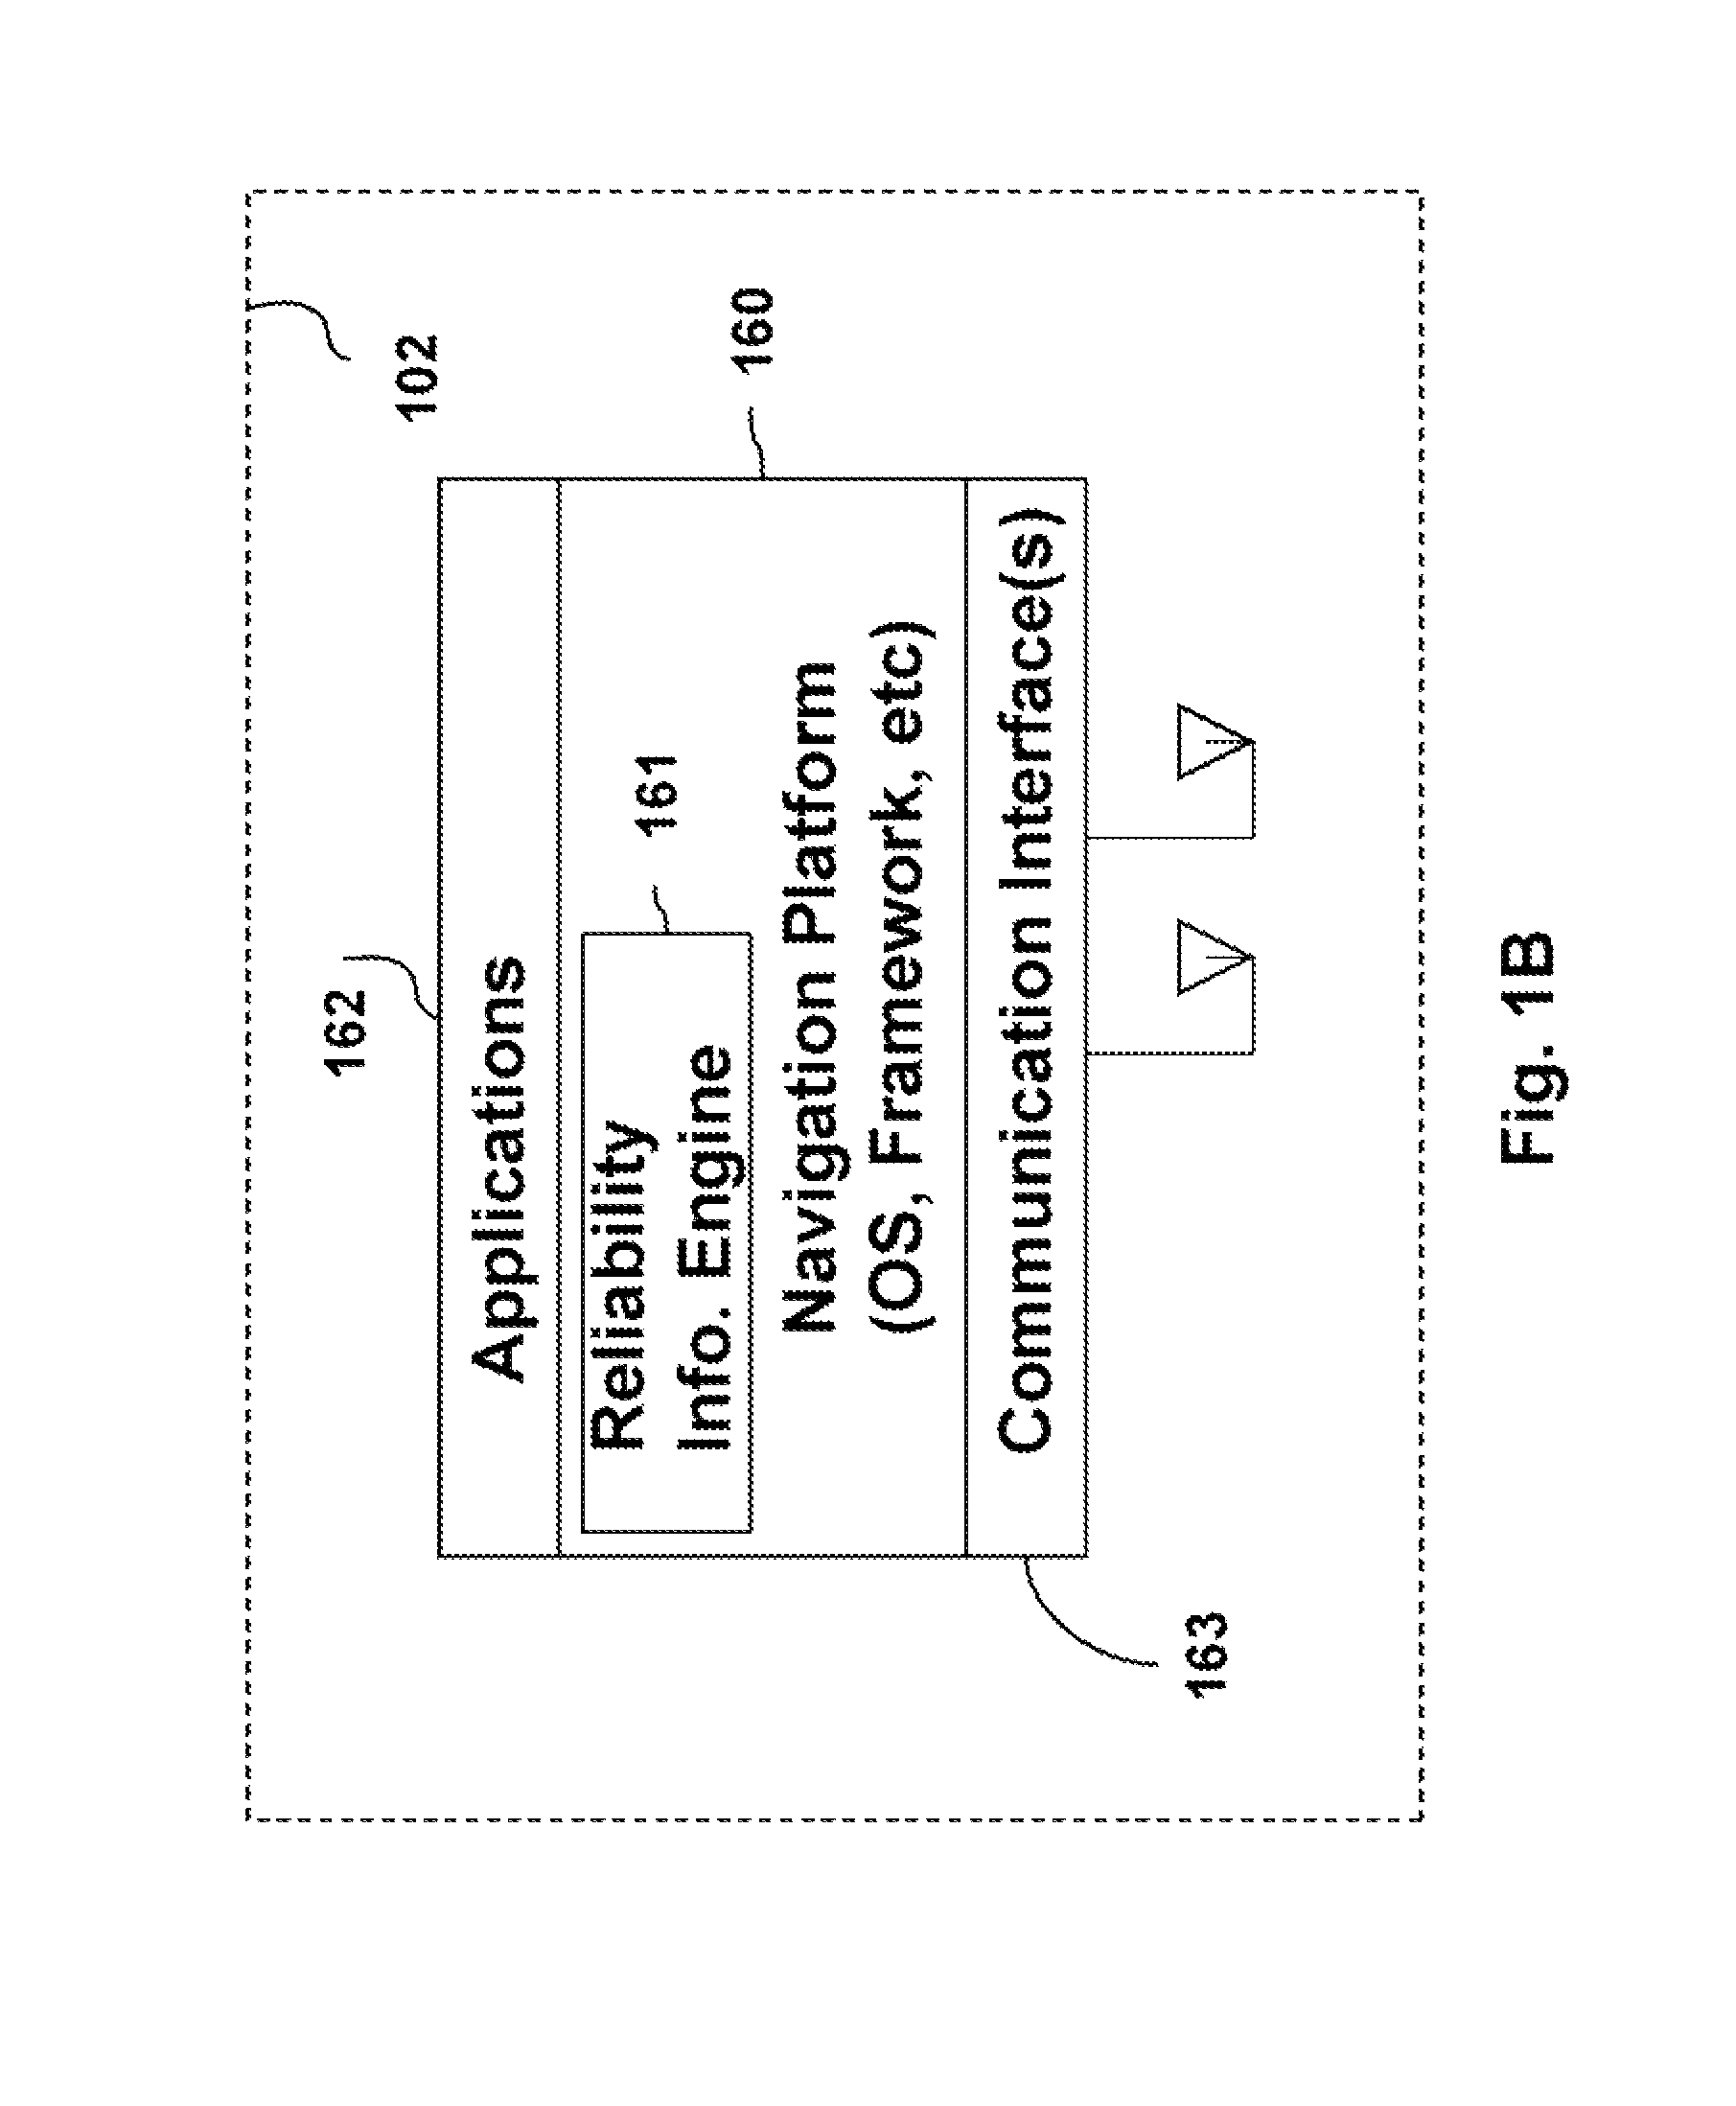 Method for generating coverage maps for wireless networks with mobile devices